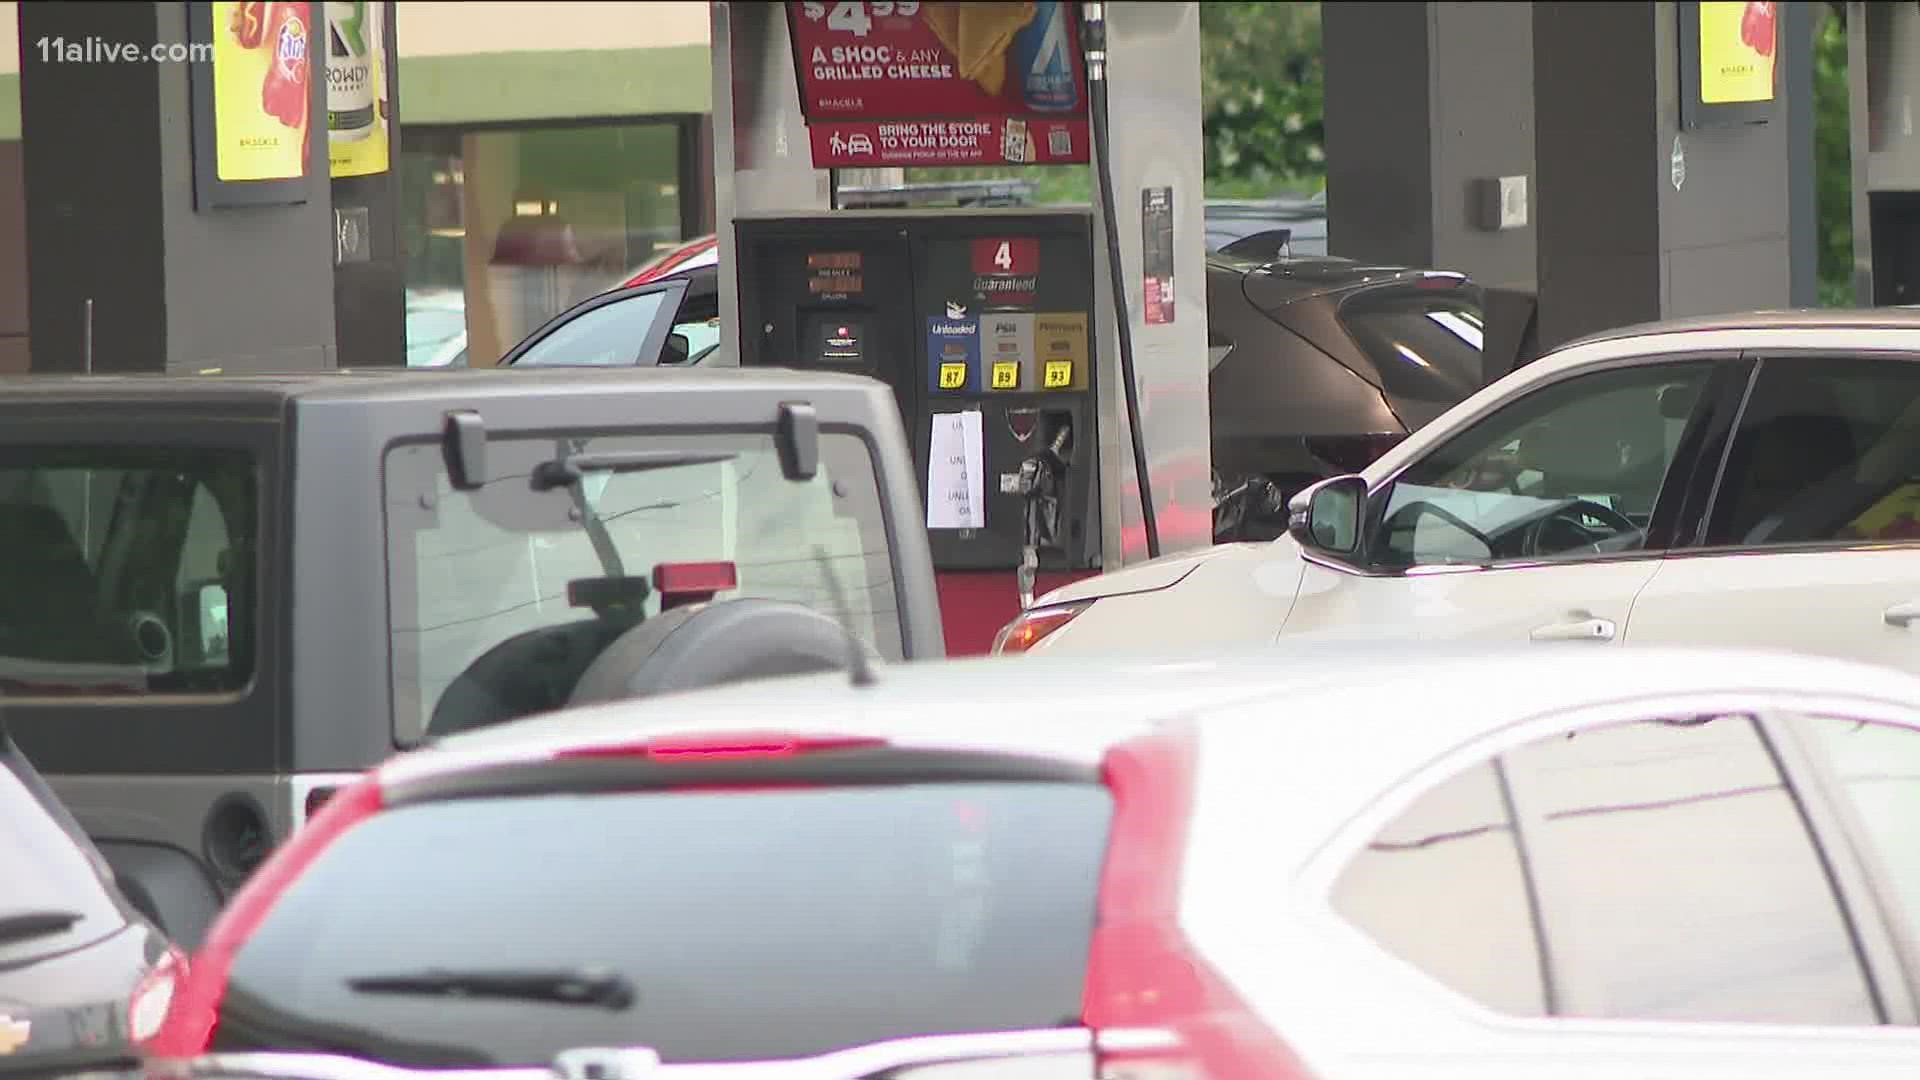 AAA puts the average price for a gallon of regular gas in Georgia at $3.18.